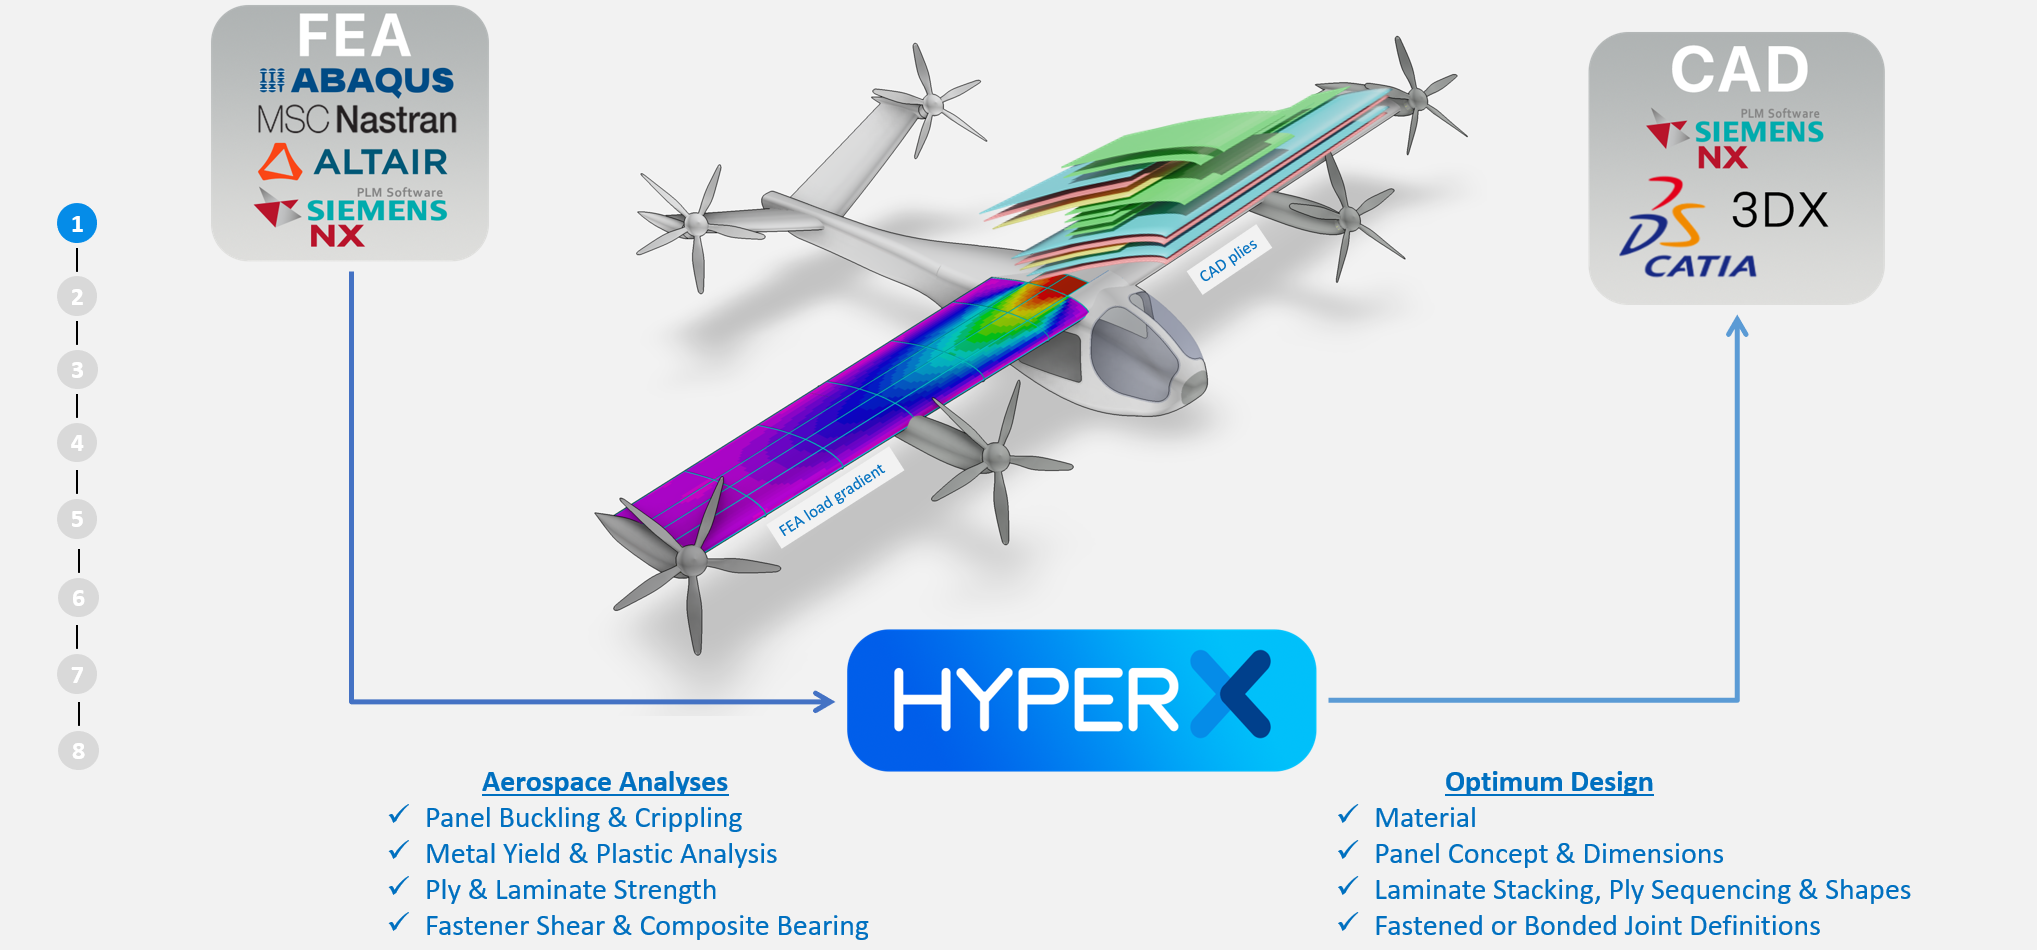 Aerospace analyses go from FEA to HyperX and design to CAD.